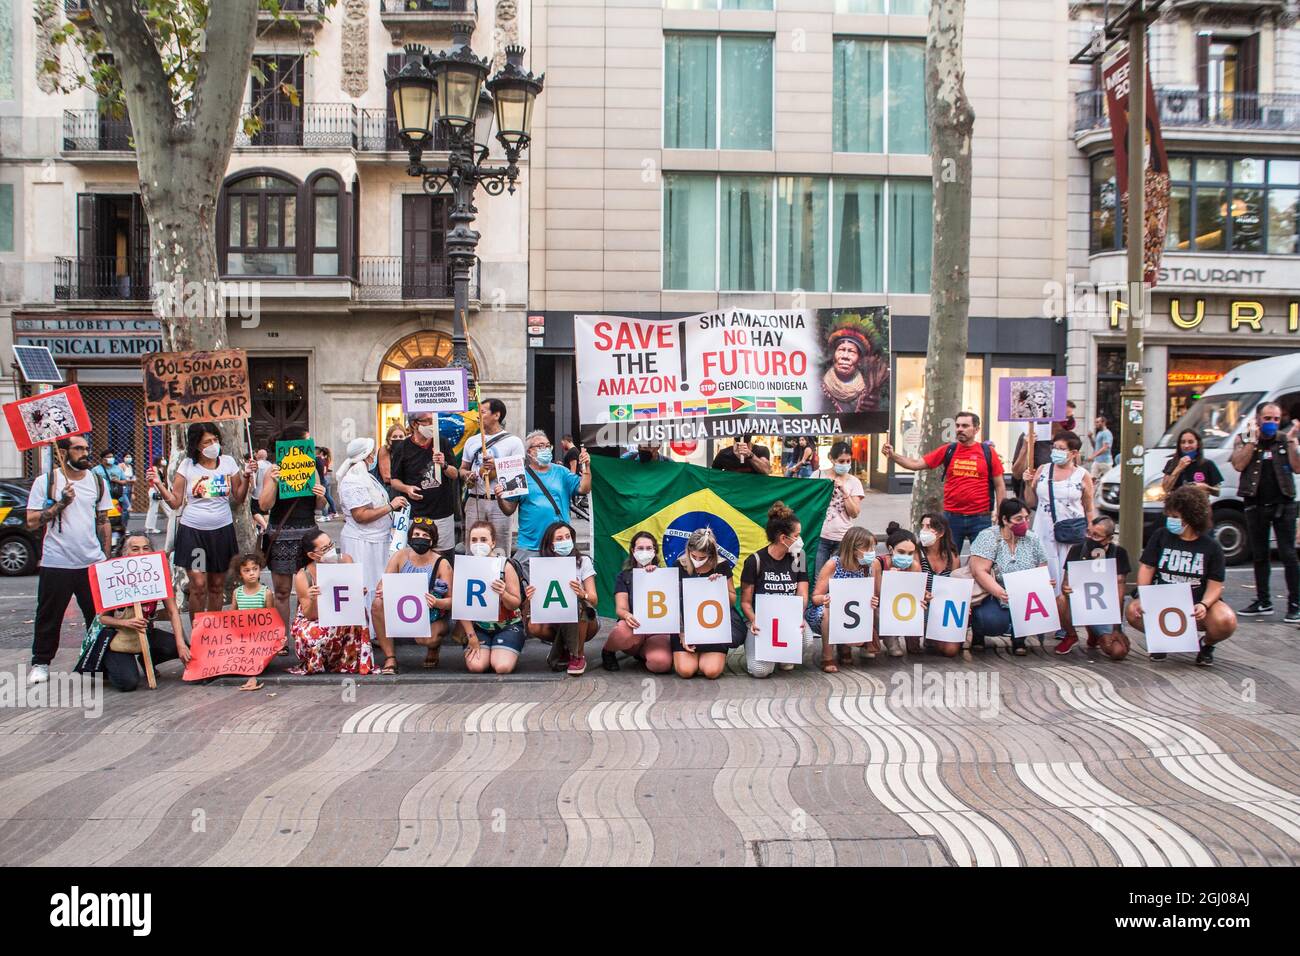 Barcelona, Catalonia, Spain. 7th Sep, 2021. Protesters are seen holding banners that say, out with Bolsonaro and save the amazon! without amazonia there is no future.On the day of the independence of Brazil, September 7, the president of Brazil, Jair Bolsonaro, has summoned his supporters in demonstrations throughout the country and incites threats to democracy and a possible coup d'état. Various groups and political parties in the country have reacted against and called demonstrations against the president, in Barcelona a group of Brazilians have carried out an act against the president Stock Photo